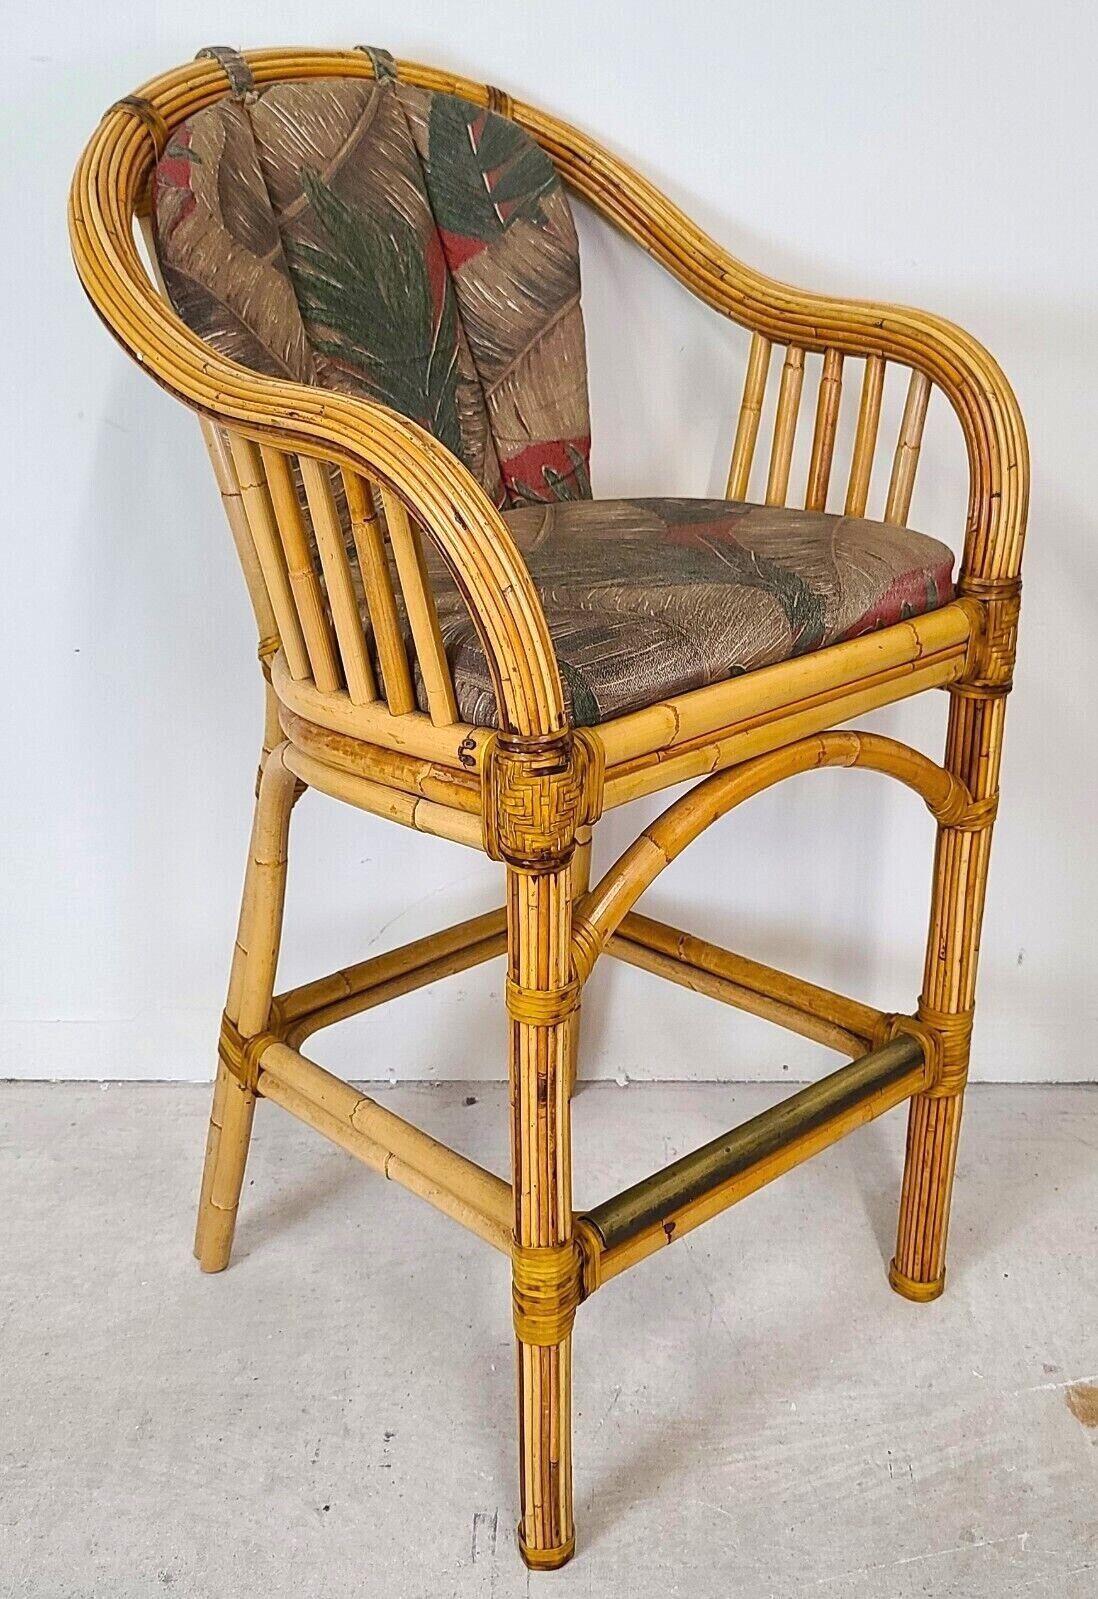 For FULL item description be sure to click on CONTINUE READING at the bottom of this listing.
Offering One Of Our Recent Palm Beach Estate Fine Furniture Acquisitions Of A Set of 4 Vintage Palm Beach Bamboo & Leather Rattan Barstools
Featuring